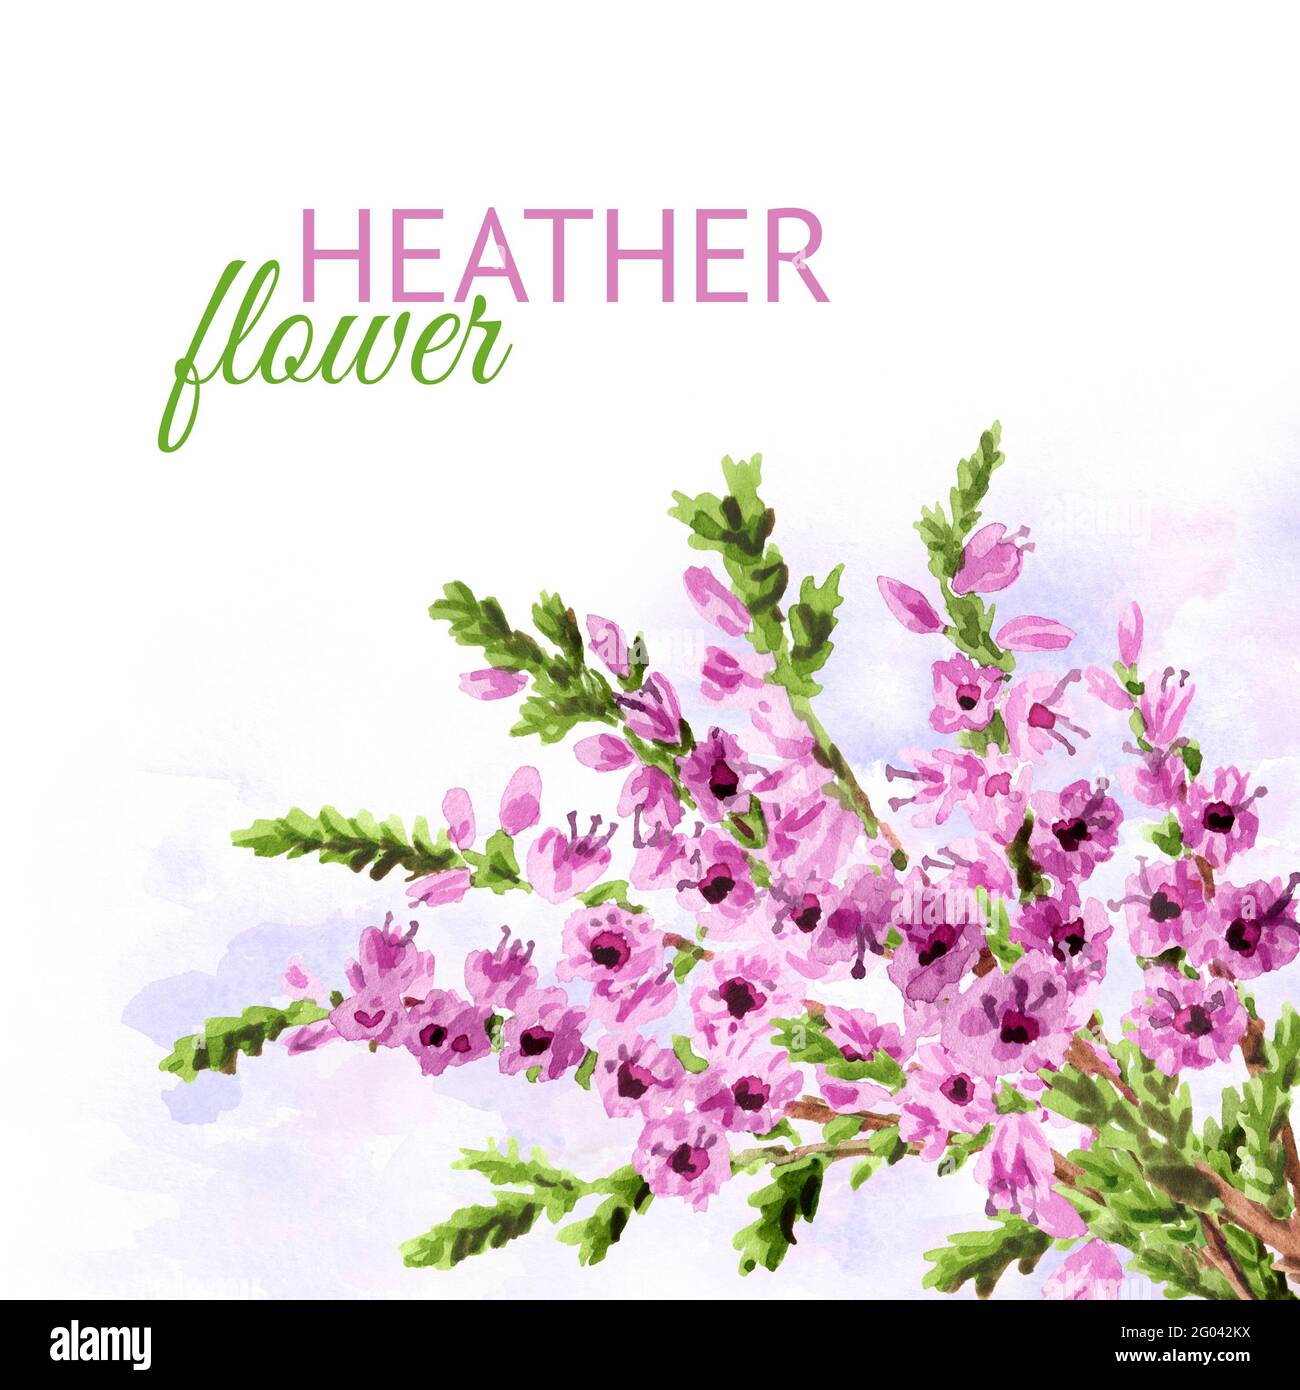 Heather flower card. Watercolor hand drawn illustration isolated on white background Stock Photo